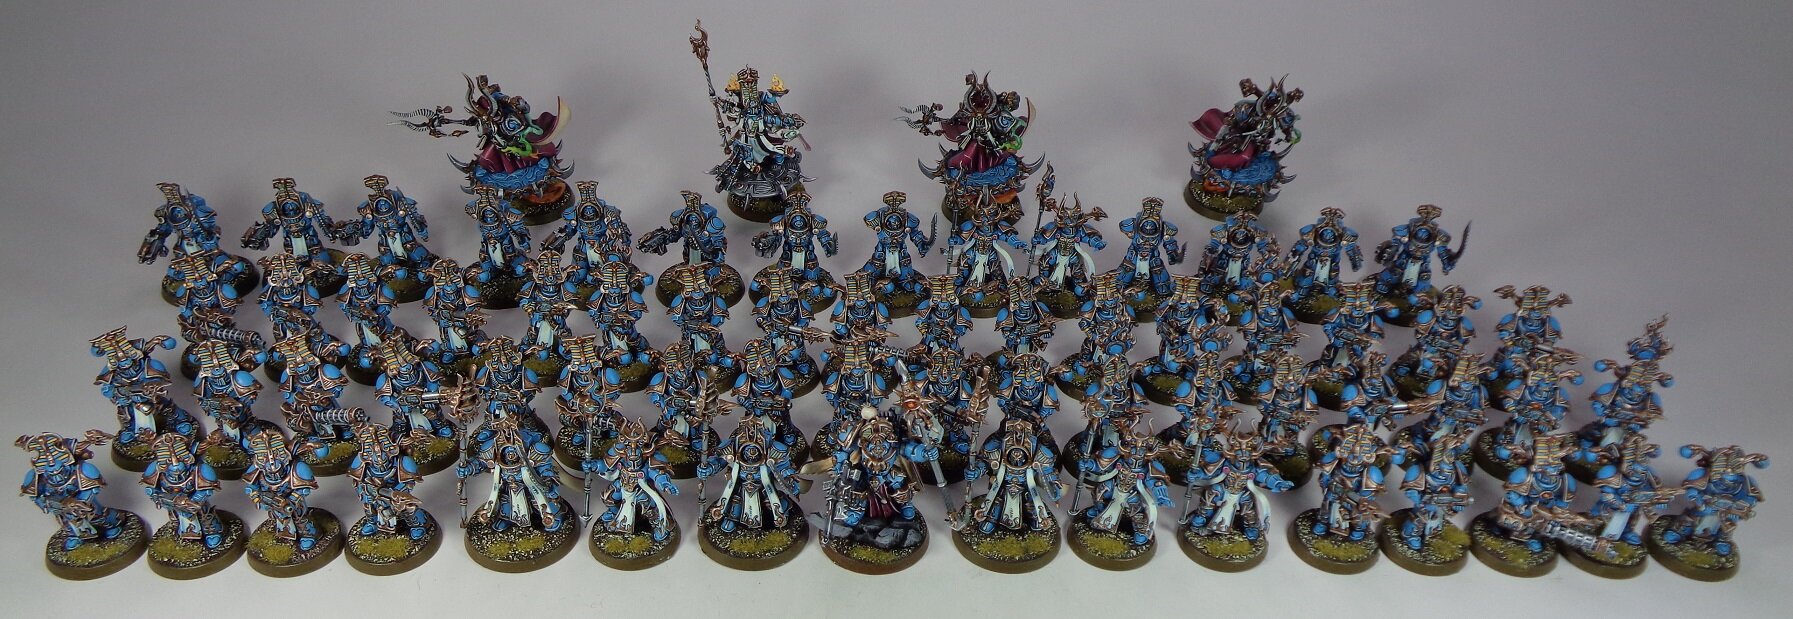 Thousand Sons Miniature Painting Commission (17).JPG